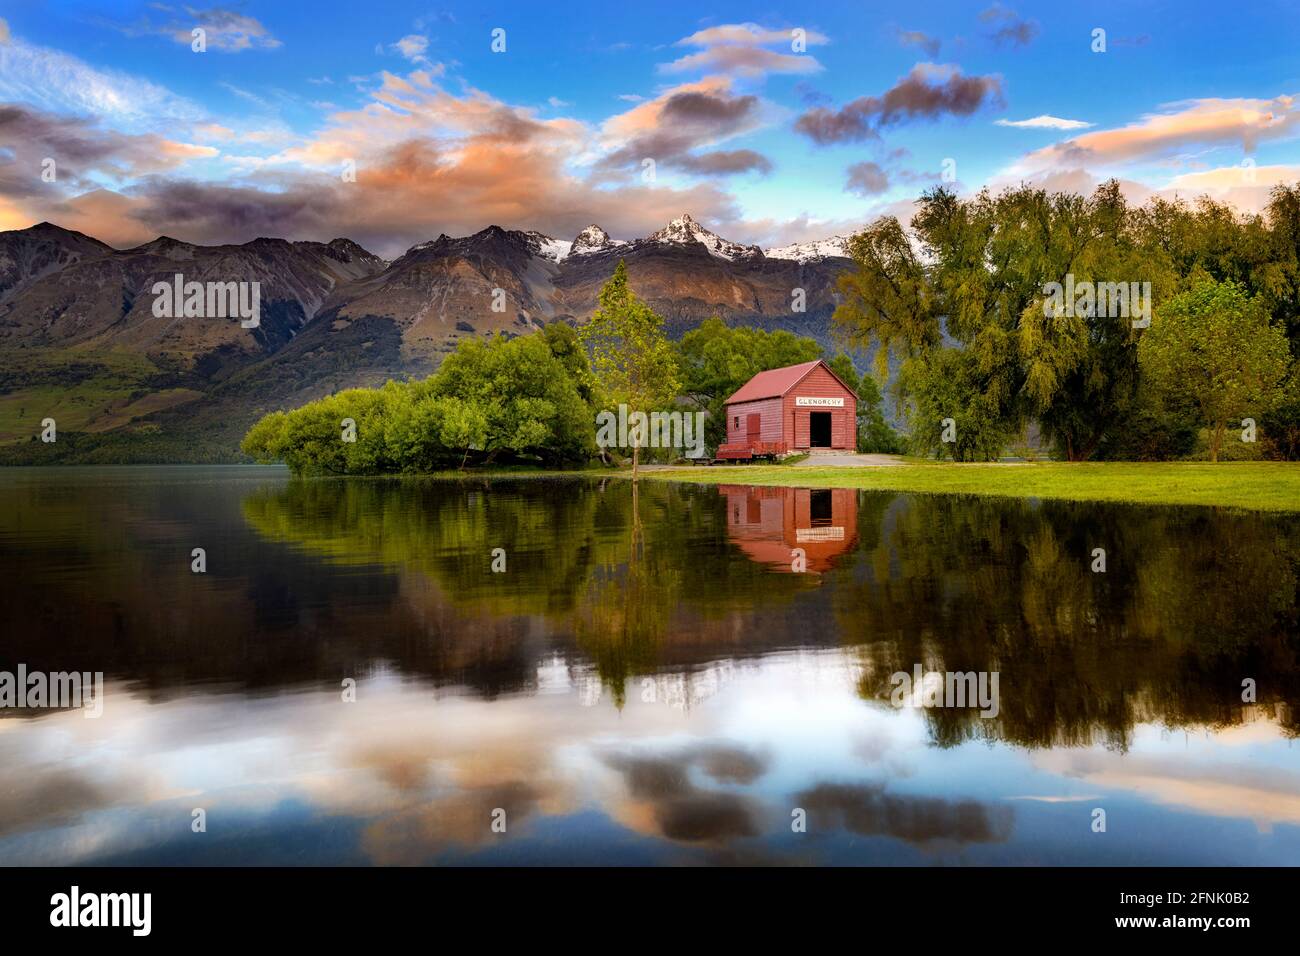 The famous Red Shed of Glenorchy with high lake levels Stock Photo